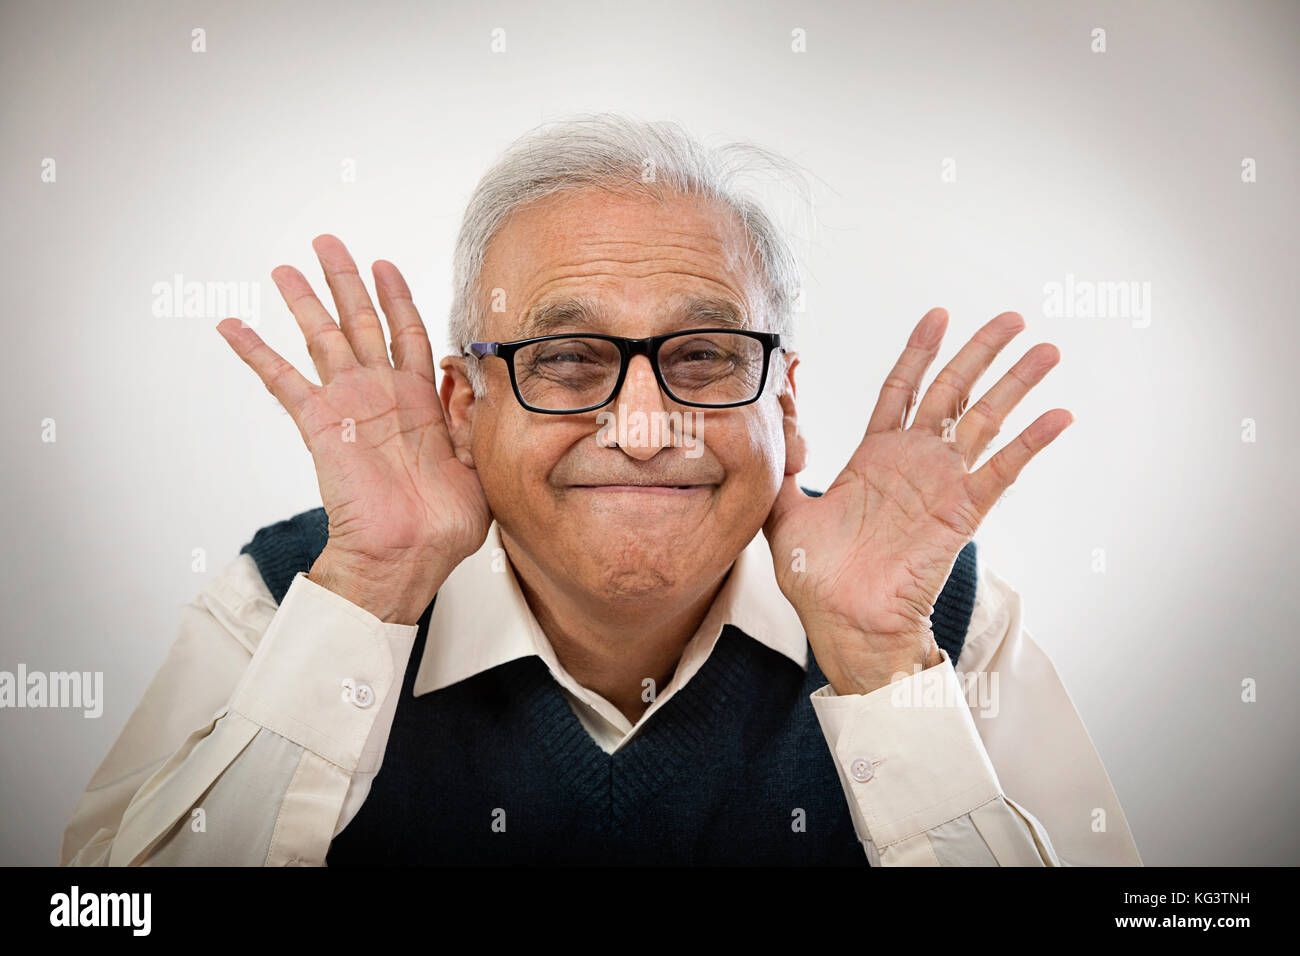 Old man making funny face with hands in his ears Stock Photo